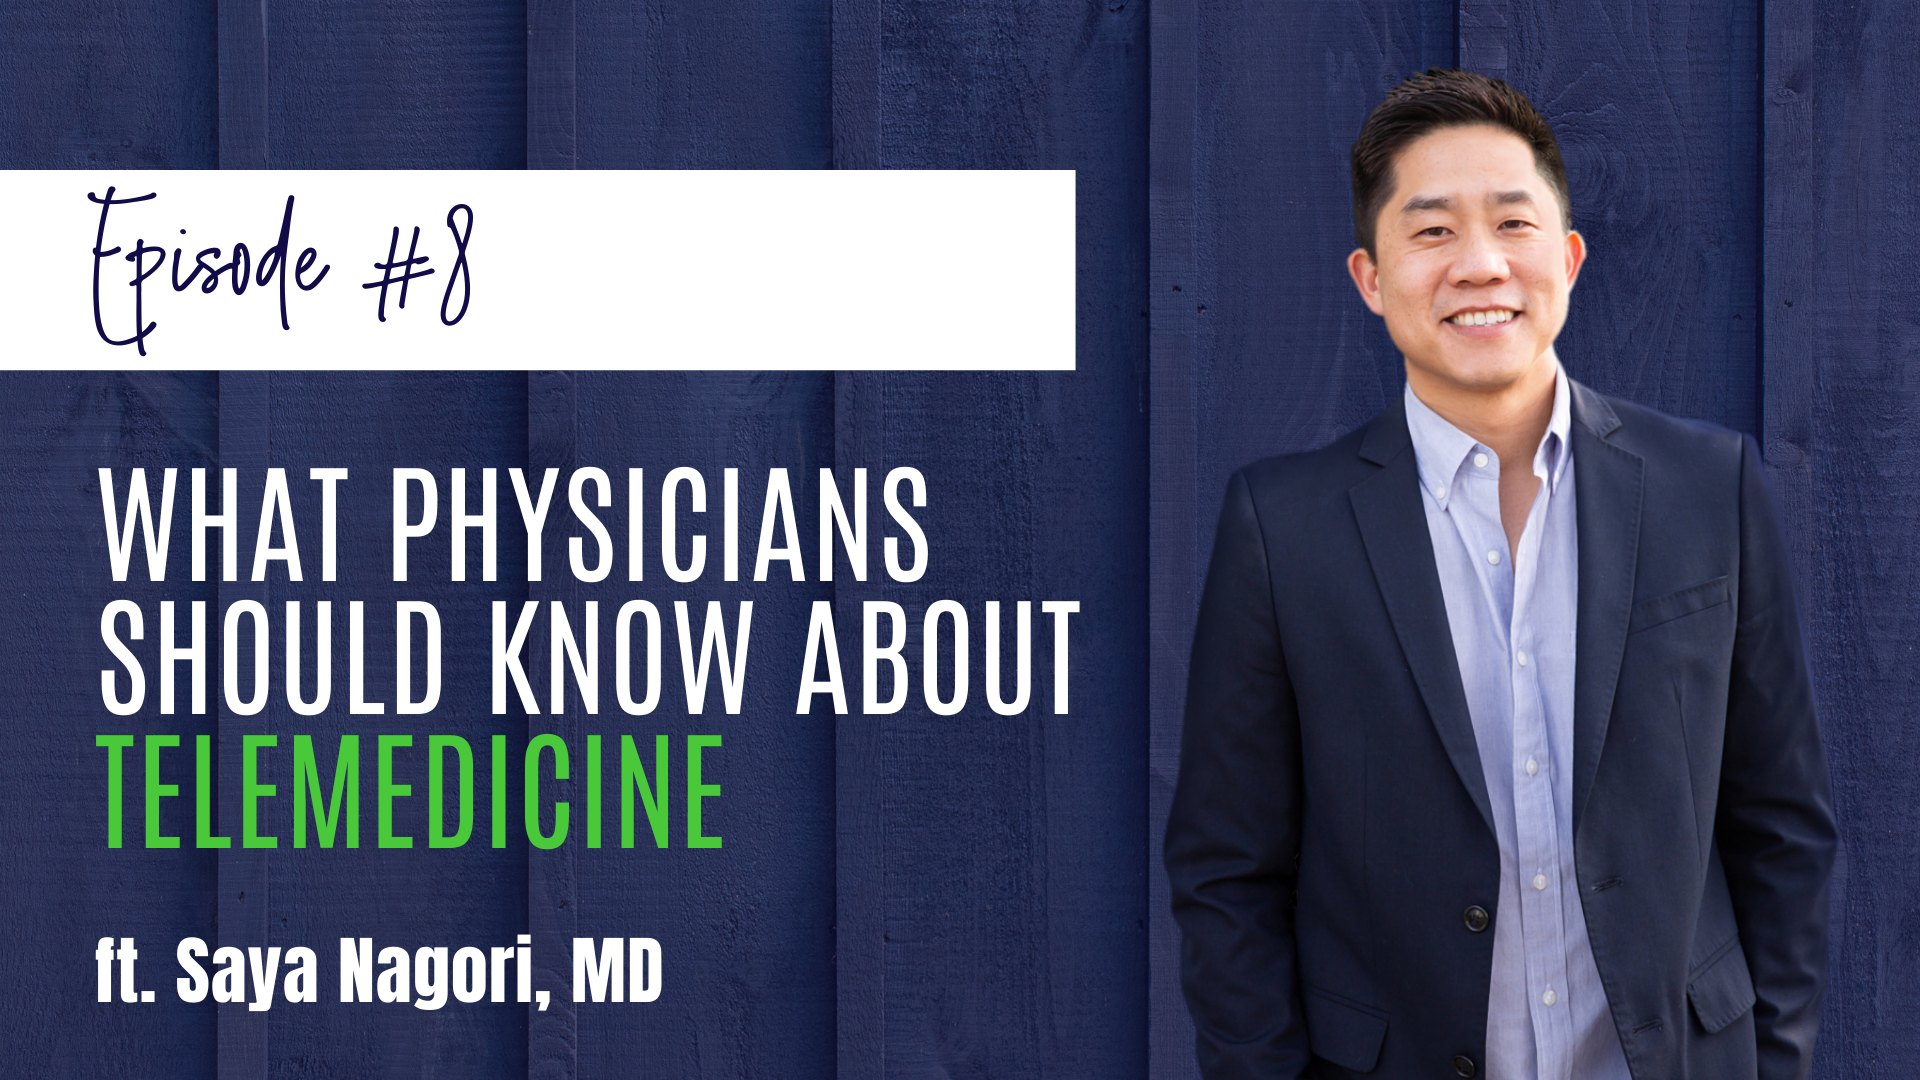 What Physicians Should Know About Telemedicine ft. Saya Nagori, MD Dr. Saya Nagori shares the ins and outs of telemedicine, how its adoption is accelerating due to COVID-19, and discusses opportunities for physicians to participate in this rapidly evolving technology.